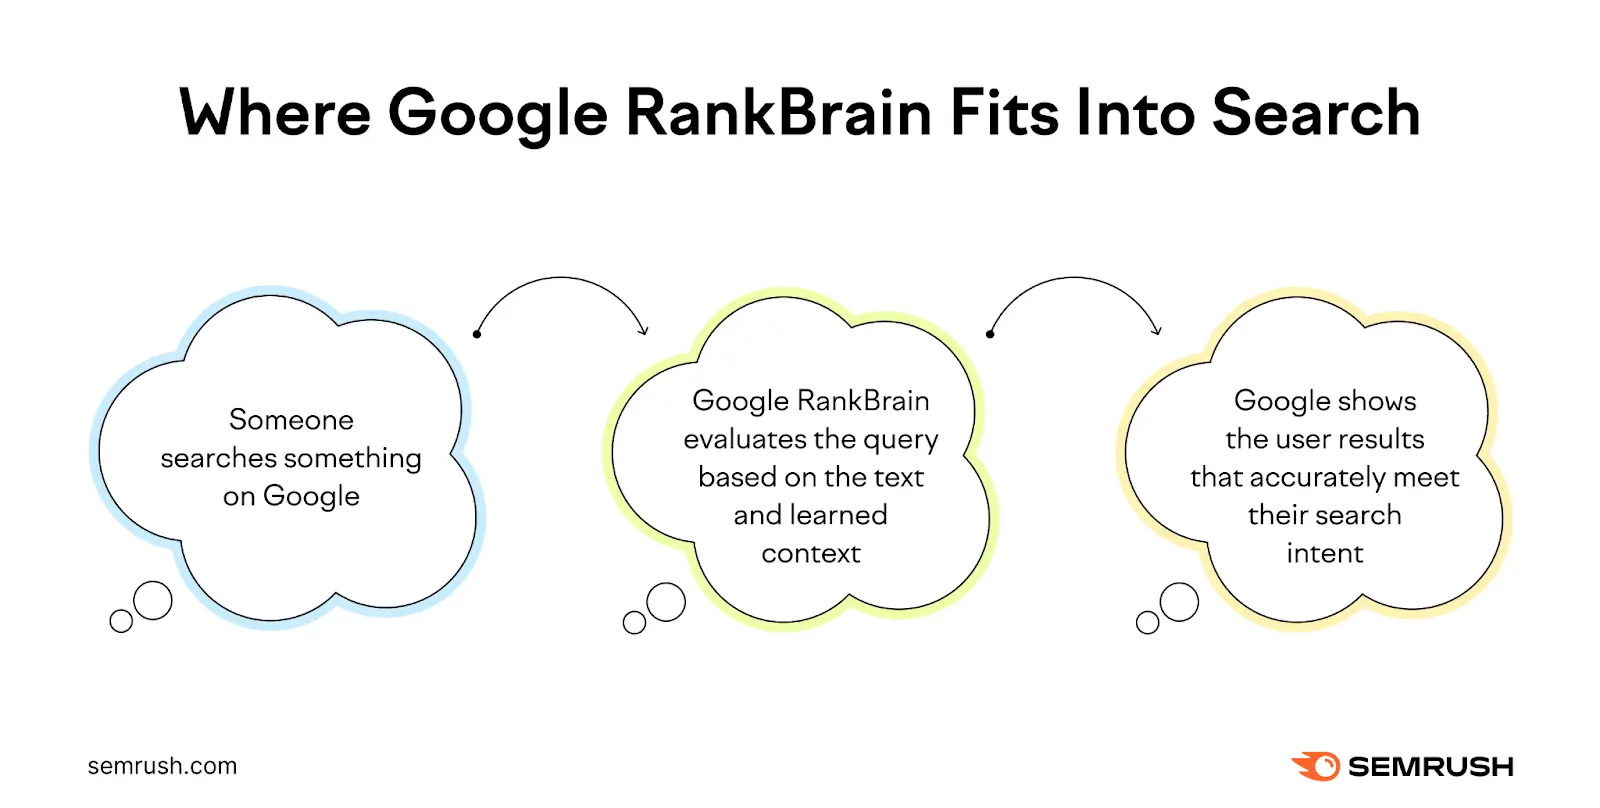 The importance of RankBrain